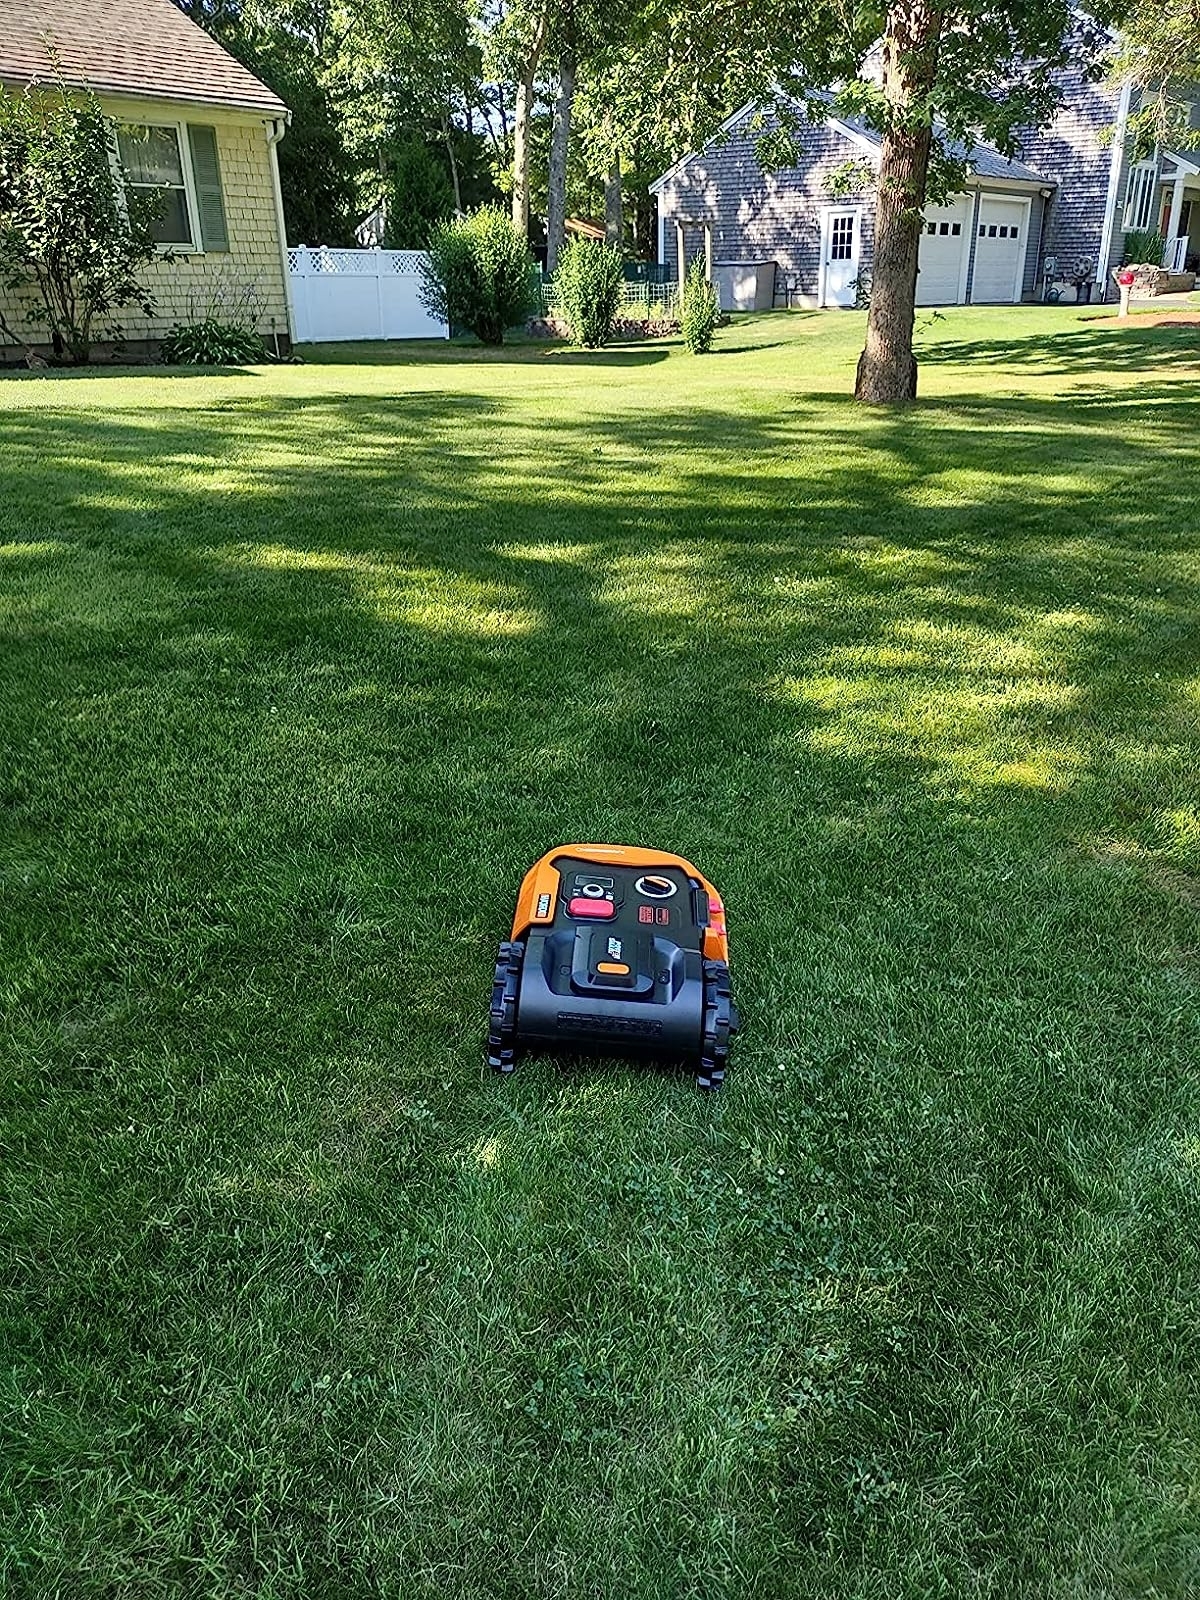 reviewer photo of the robot lawn mower on grass